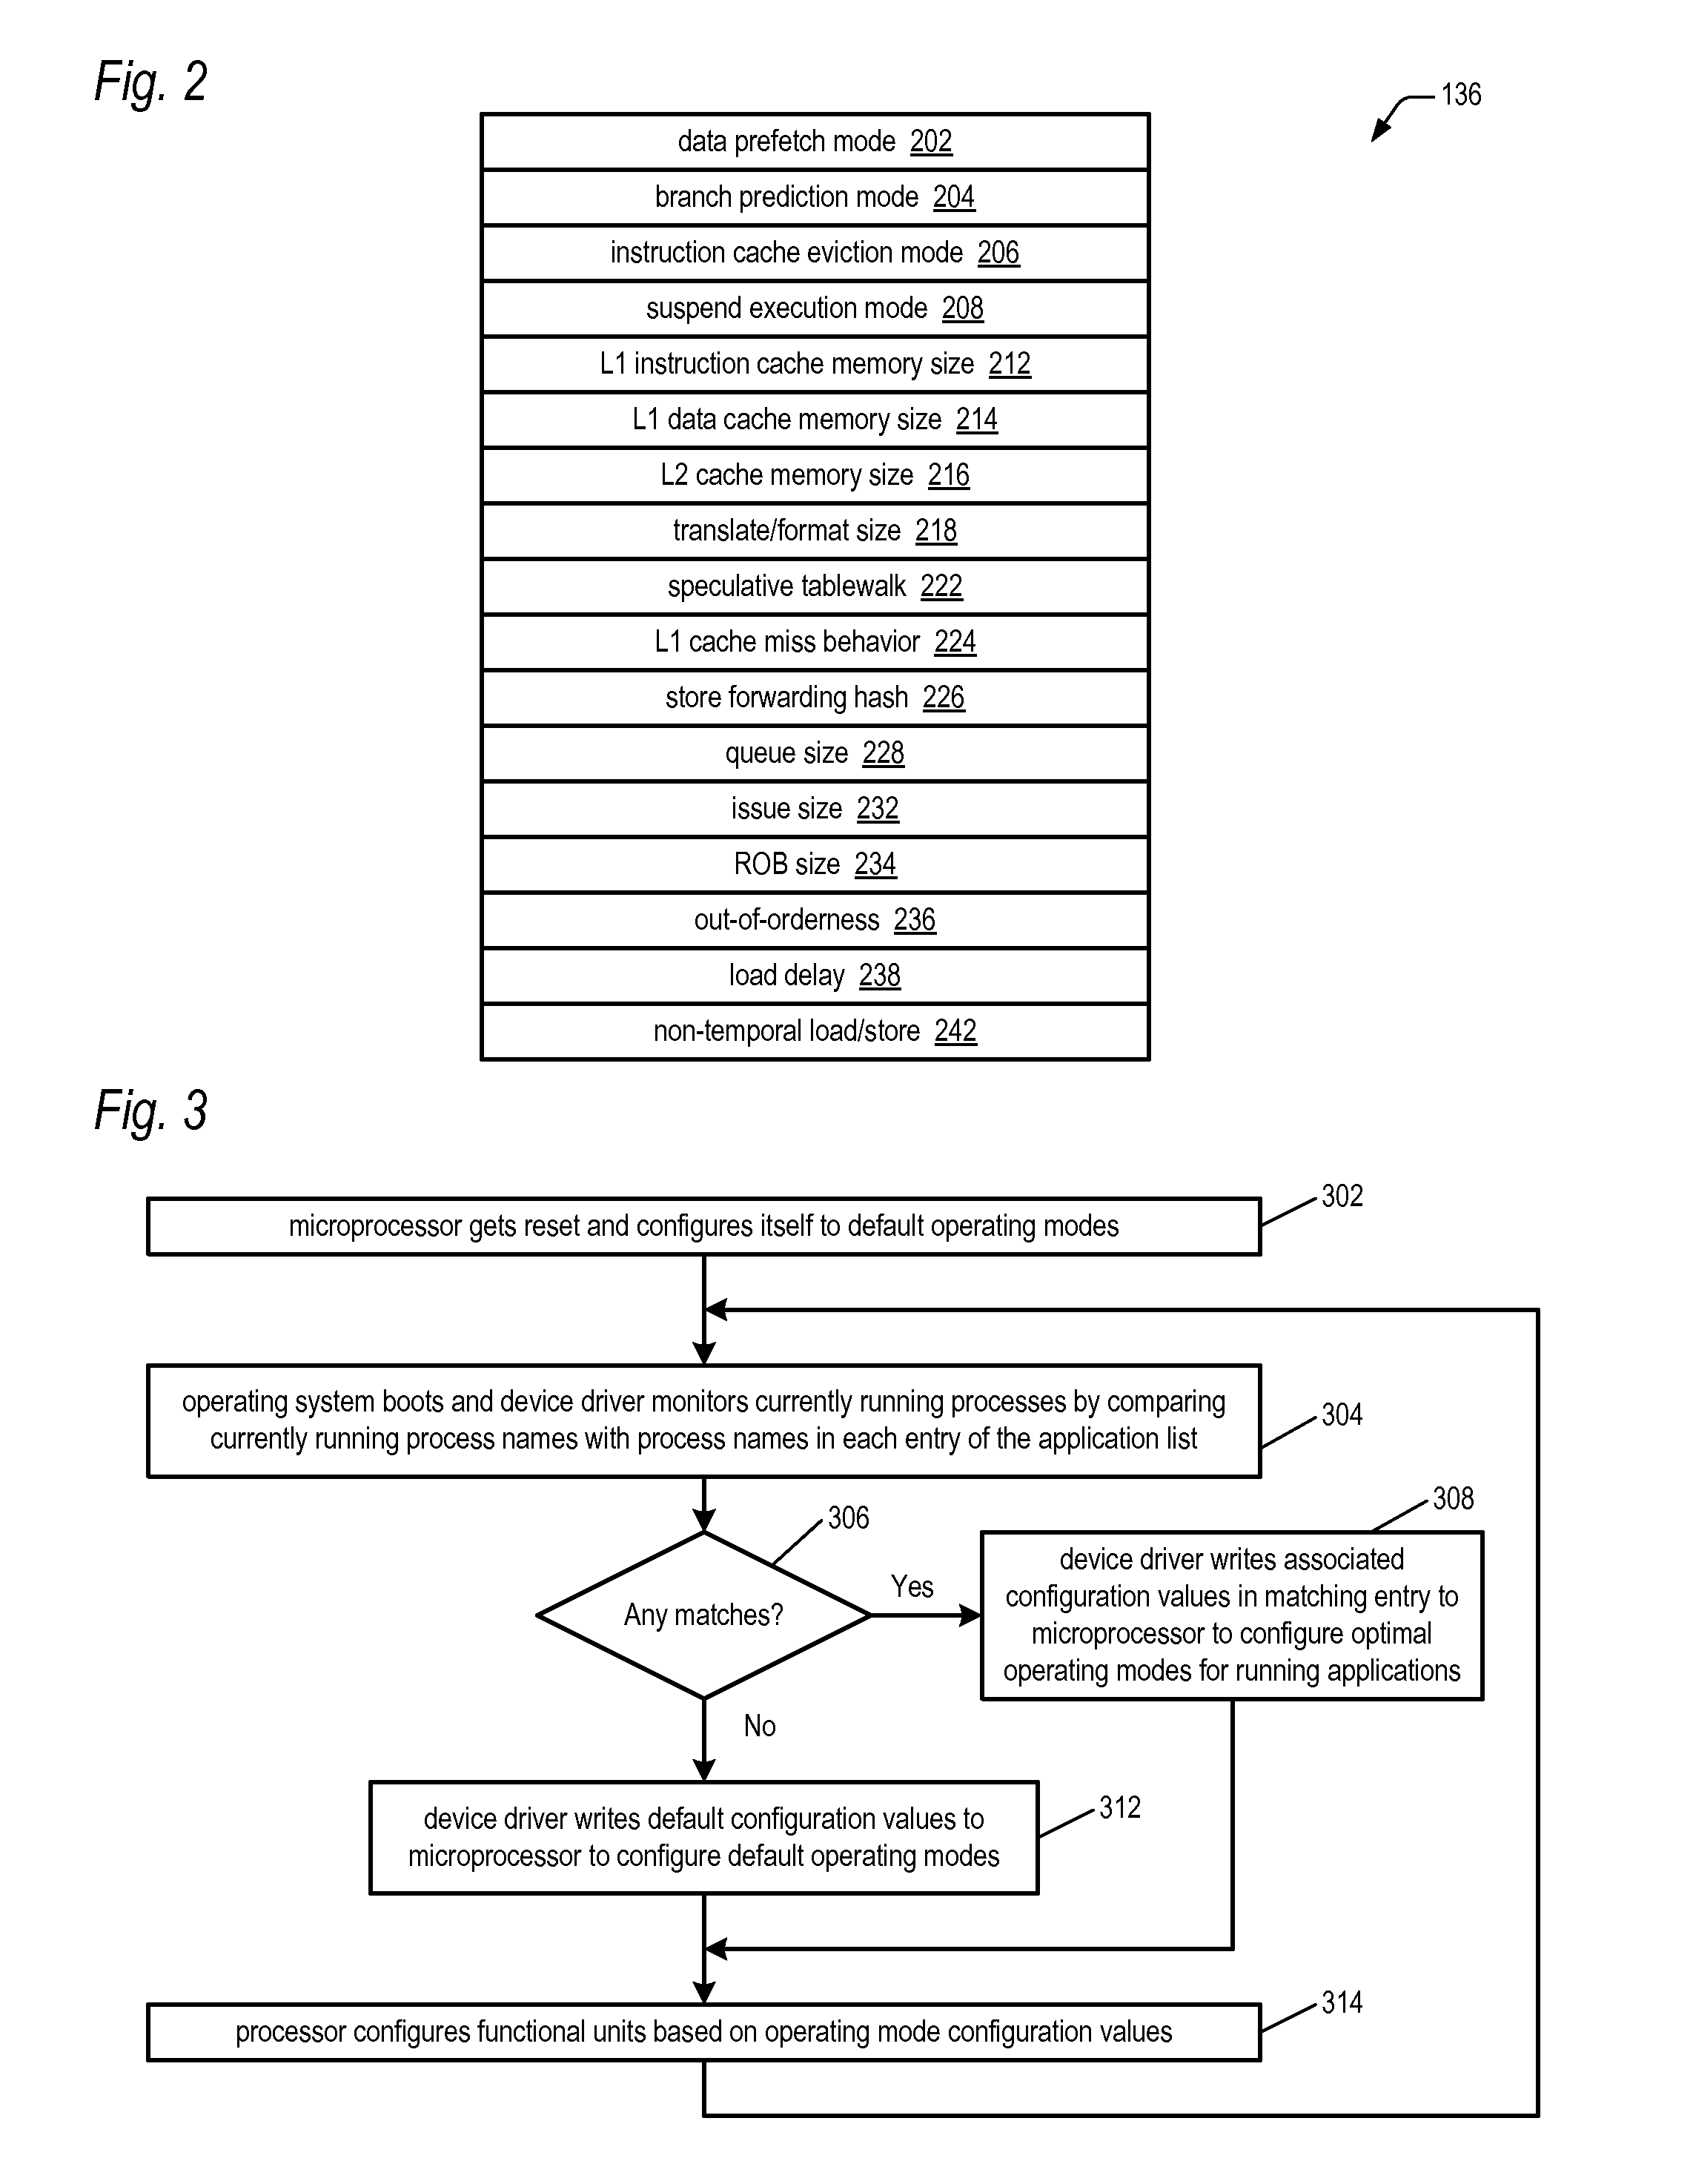 Microprocessor with multiple operating modes dynamically configurable by a device driver based on currently running applications